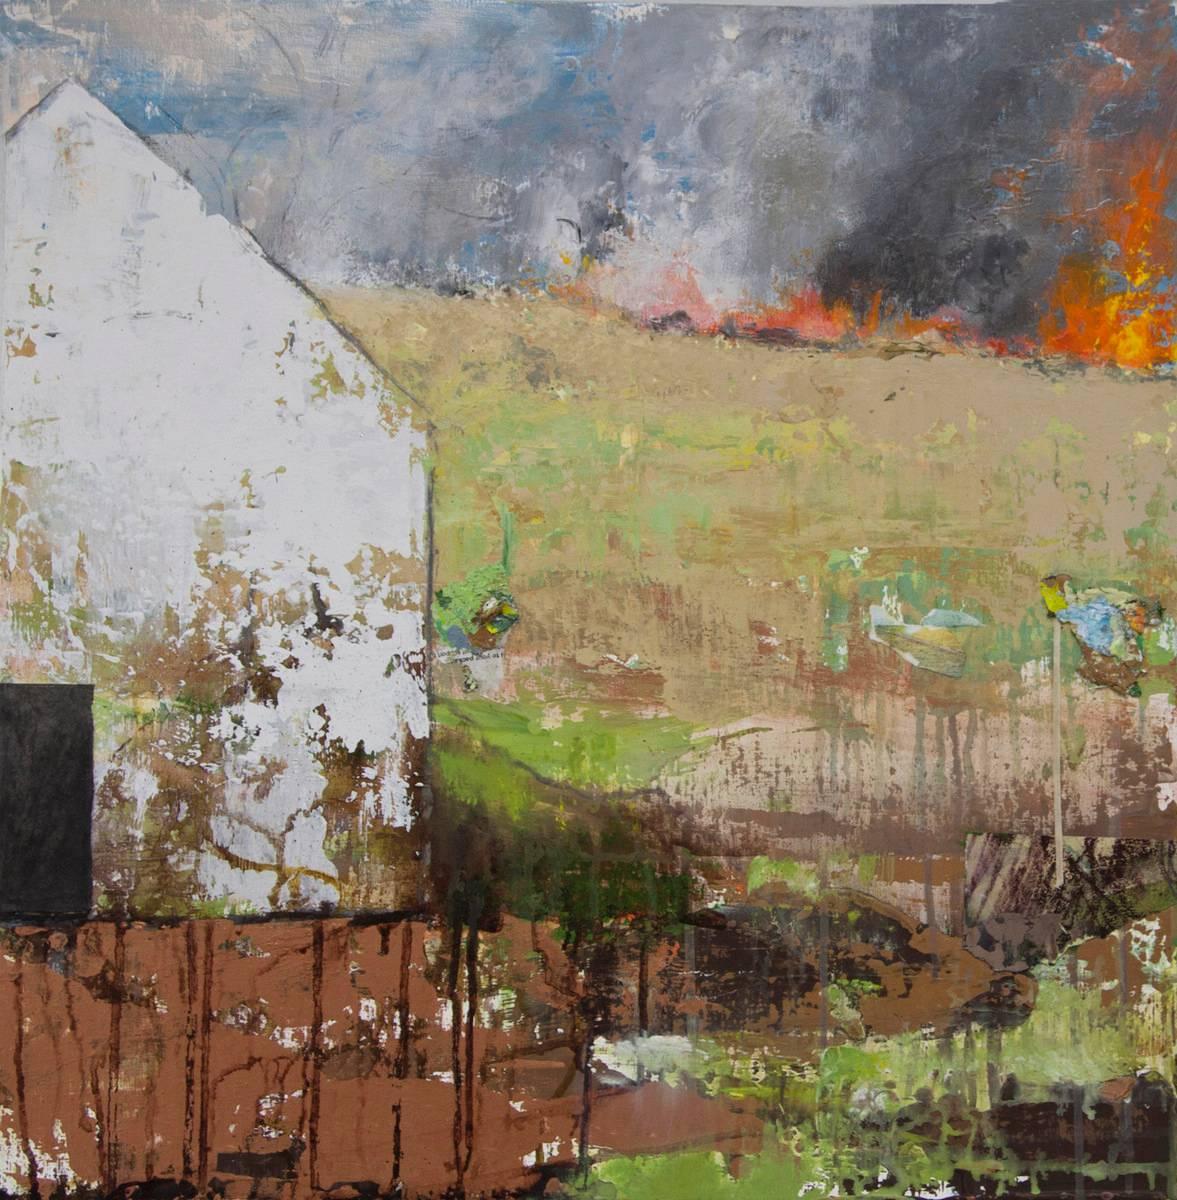 Brenda Cirioni’s painting “Distant Fire” from her “Barn Series” is a contemporary landscape featuring a white barn in a field. There is a brush fire with smoke in the distance. “Distant Fire” would be a stunning focal point for any home.


“Distant